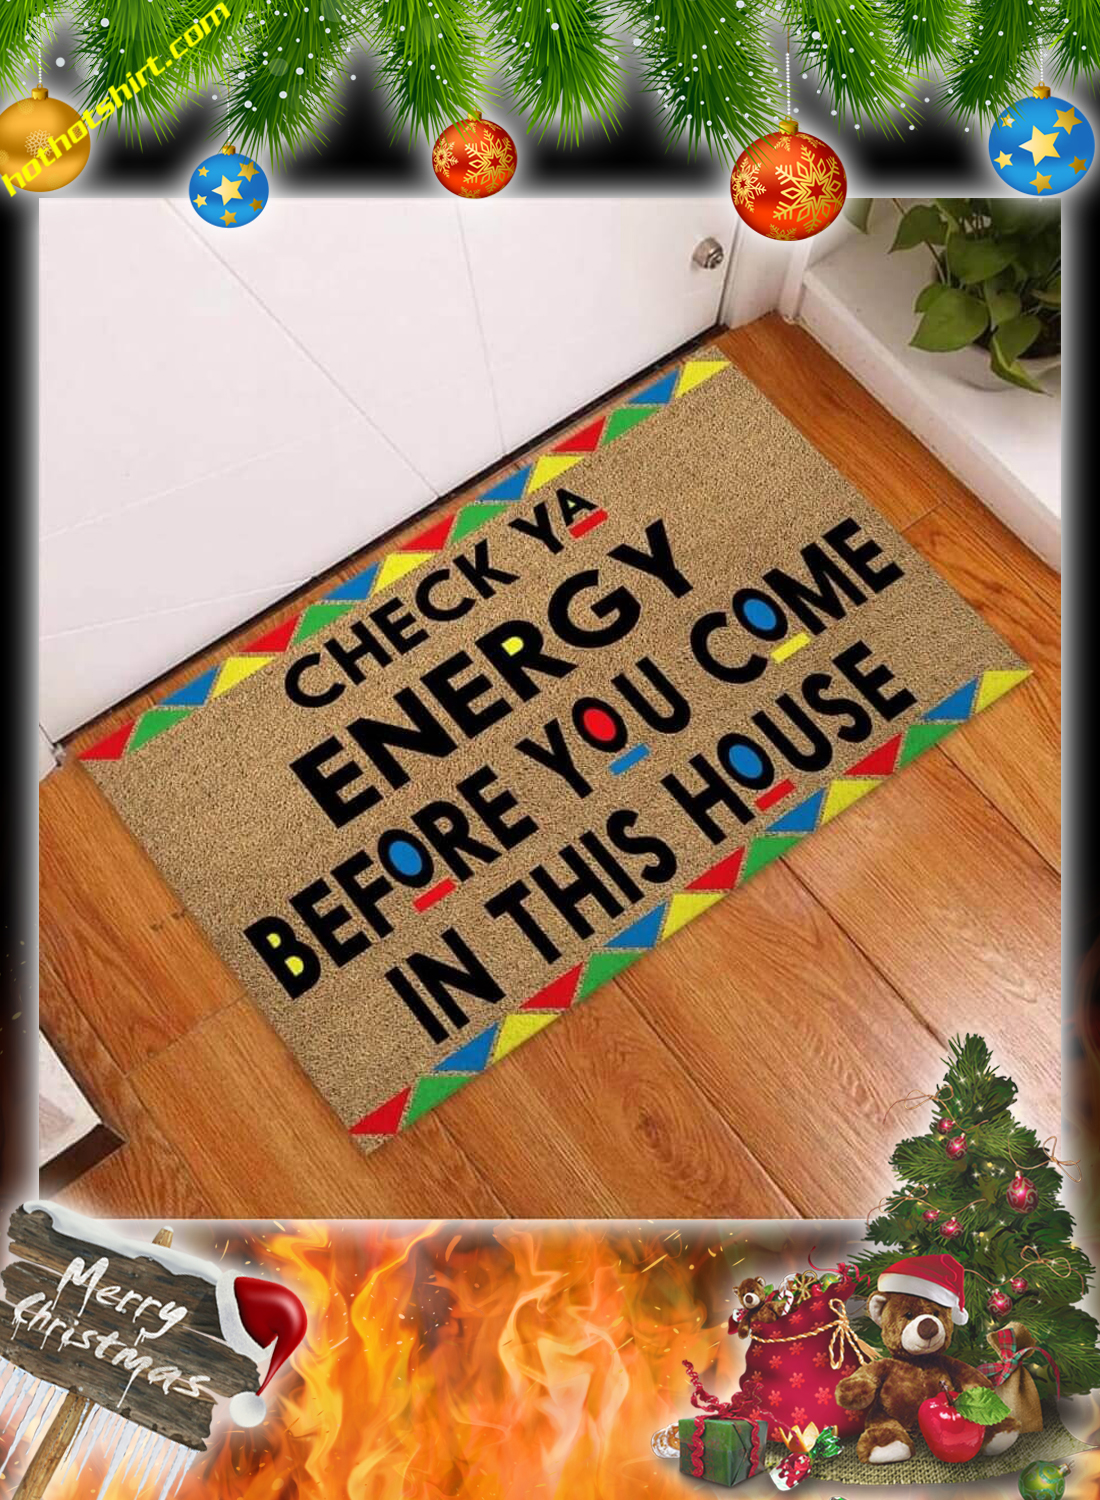 Check ya energy before you come in this house doormat 3